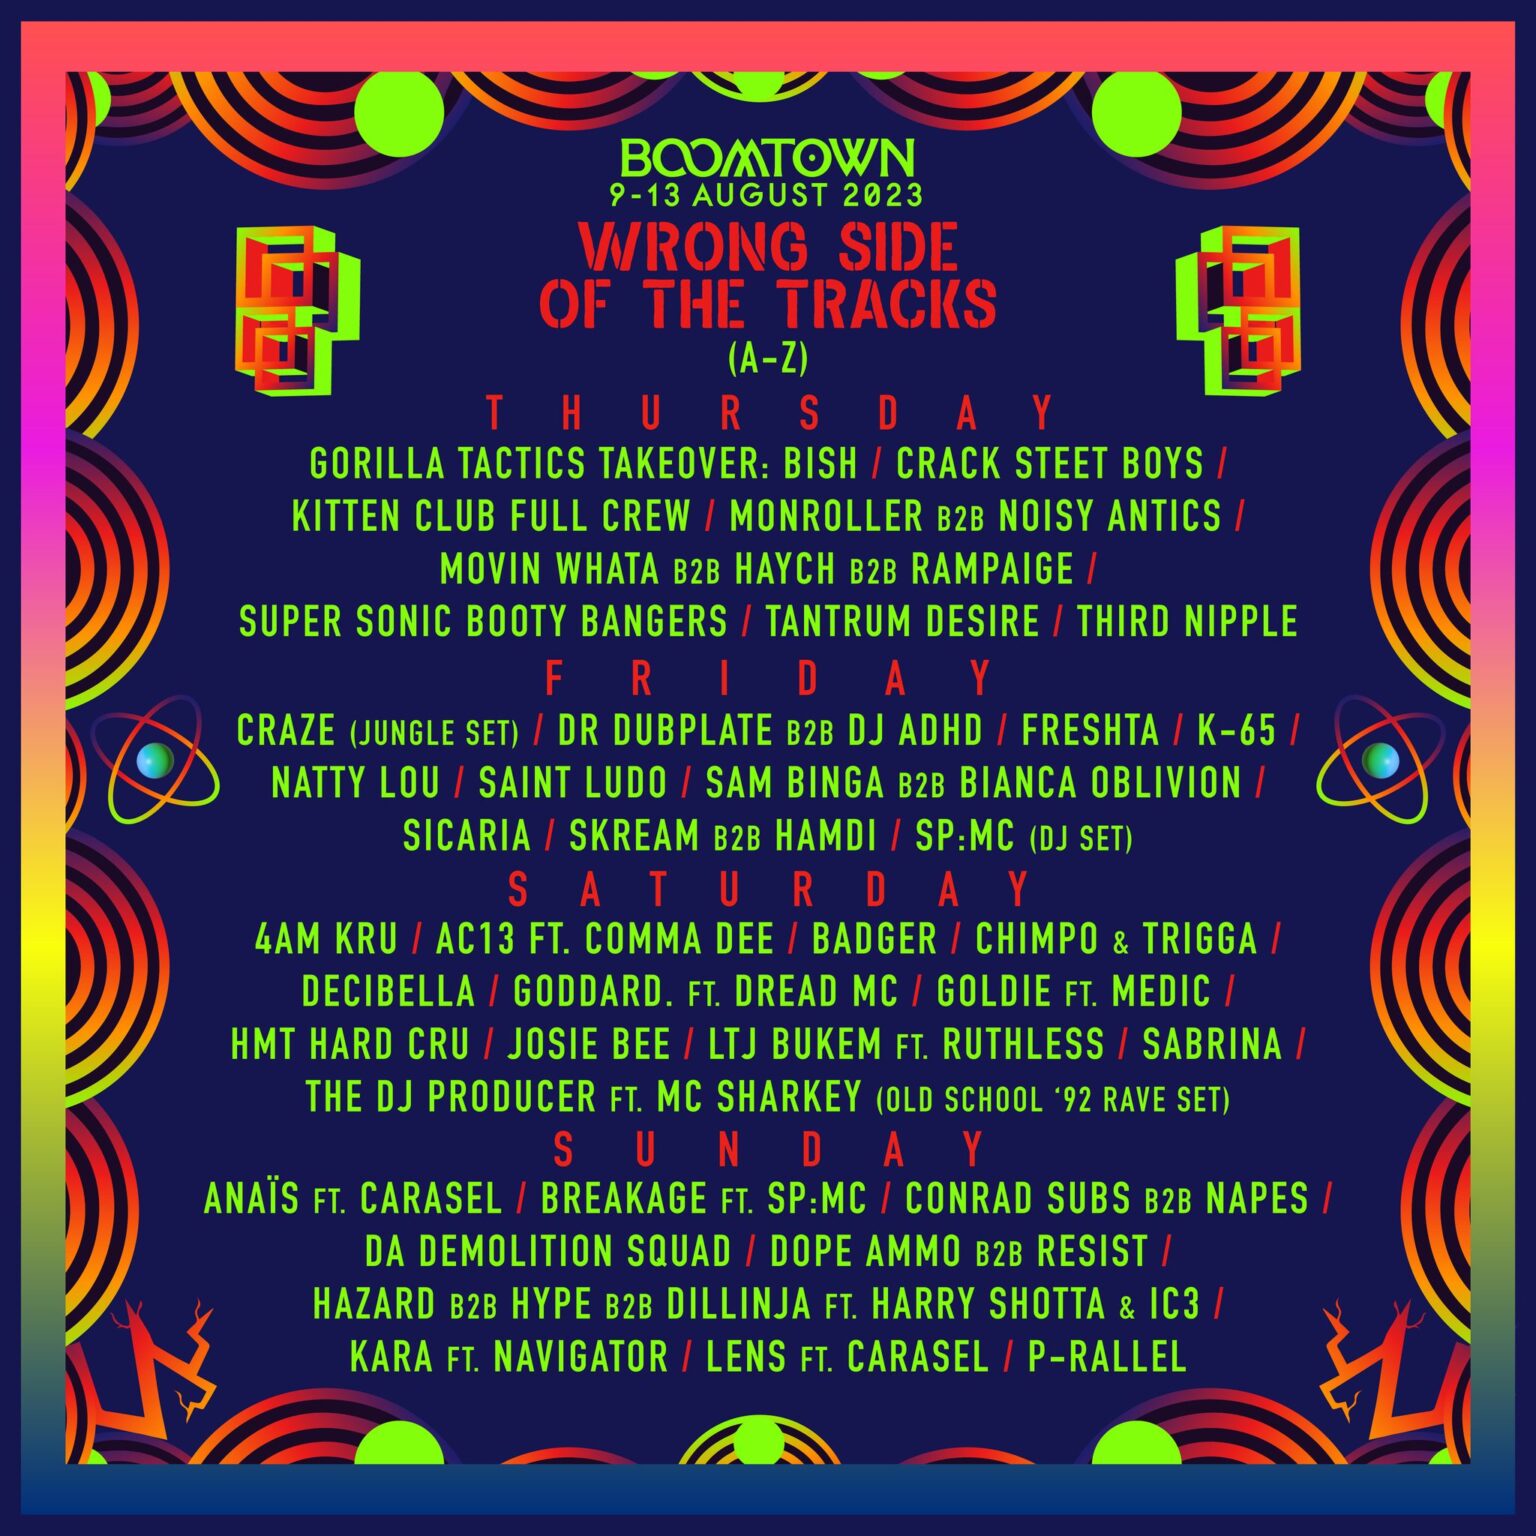 Boomtown Lineup 2023 News and Rumours Boomtown Source